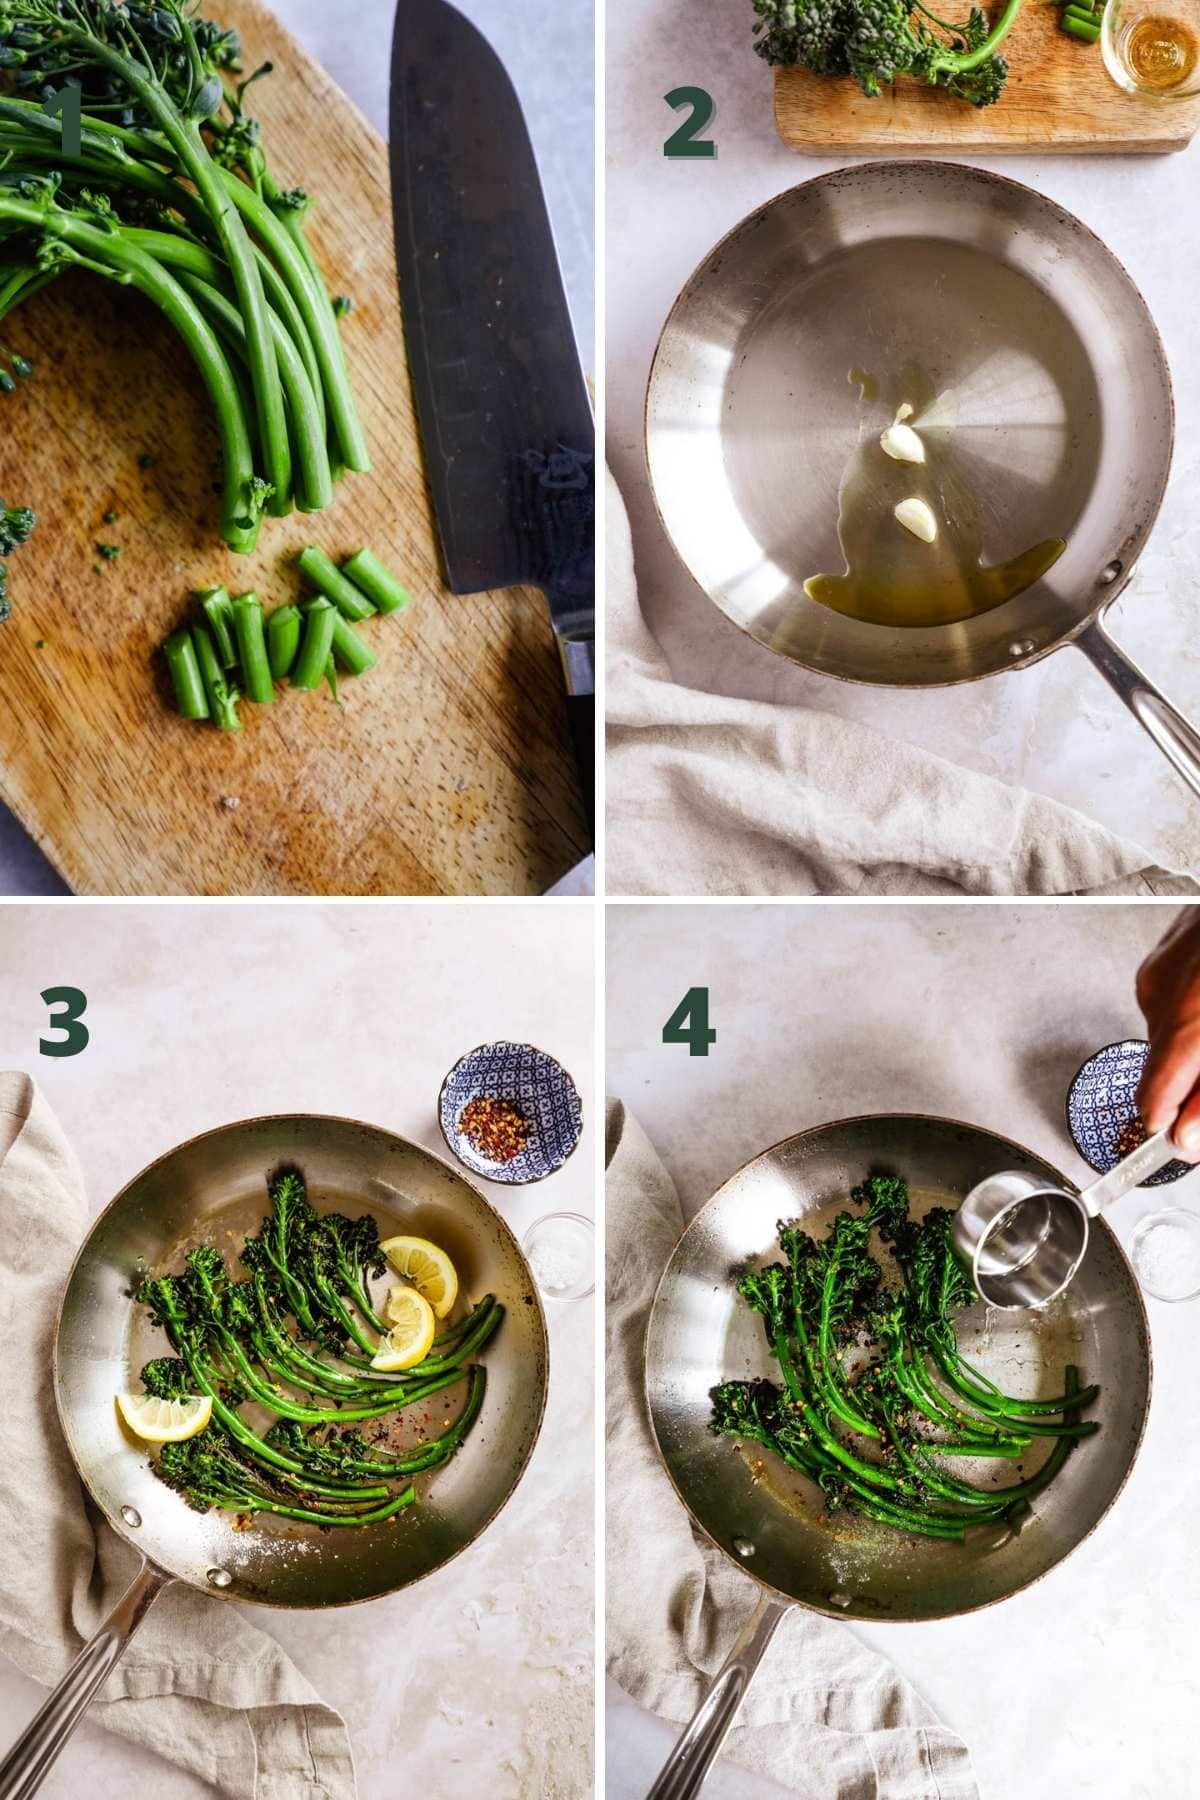 Steps to make Sautéed Broccolini (Broccoletti), including cooking the broccolini in a pan and steaming the broccolini.